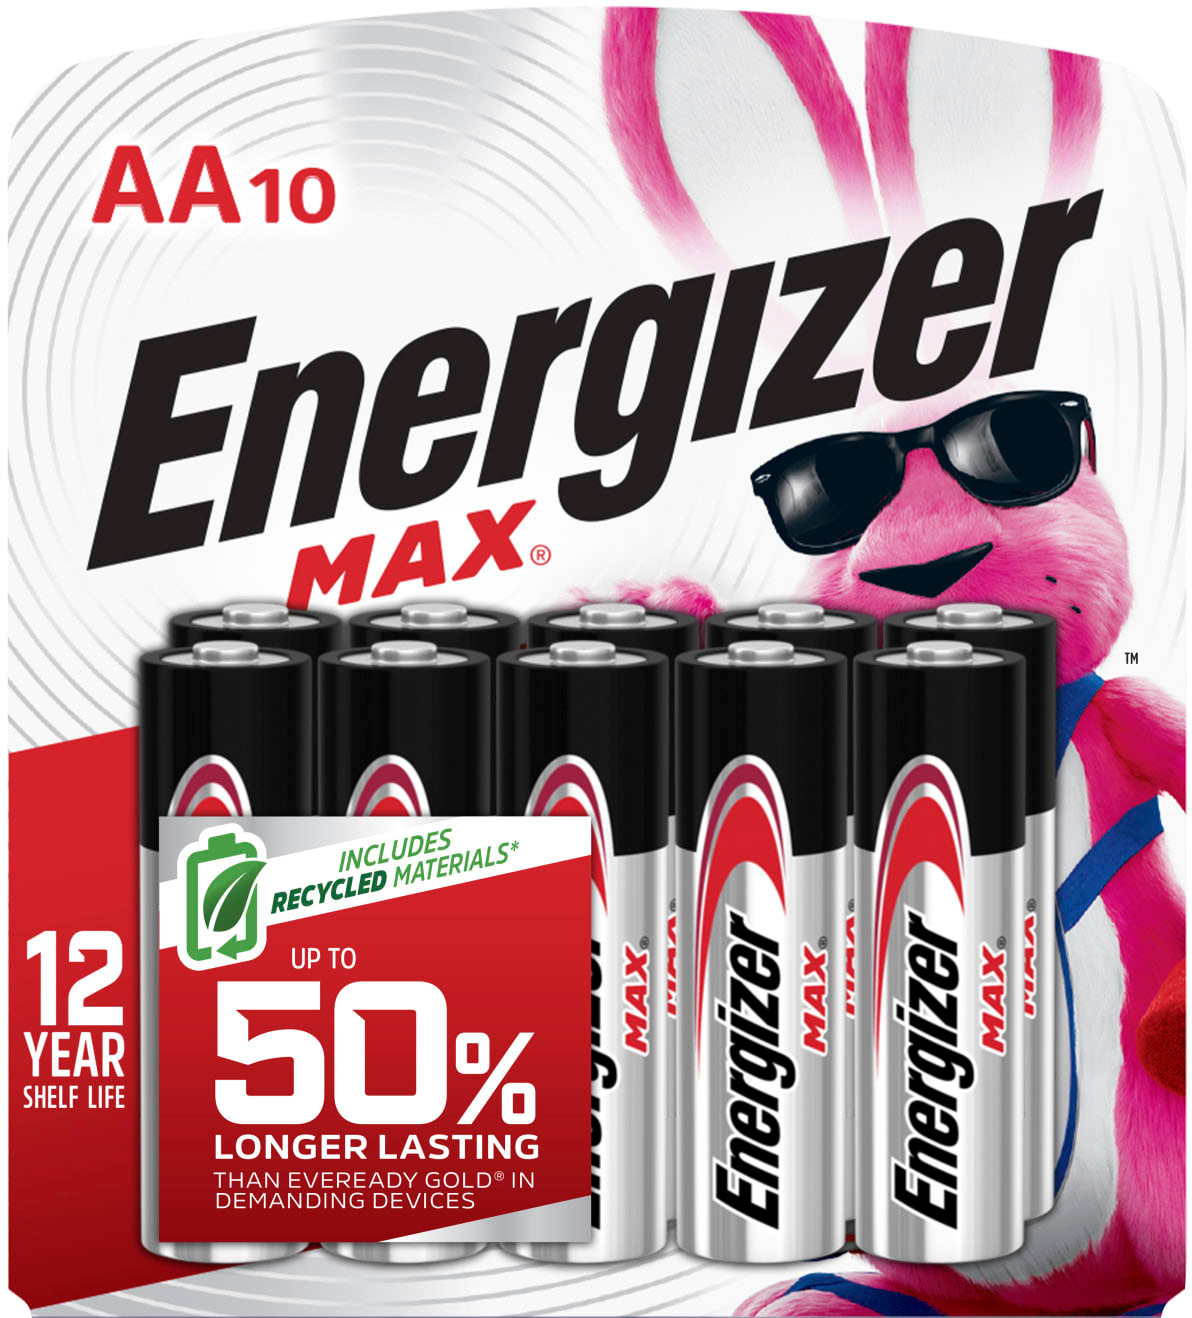 Energizer Ultimate Lithium AA Batteries, World's Longest-Lasting AA  Battery, 10 Pack 